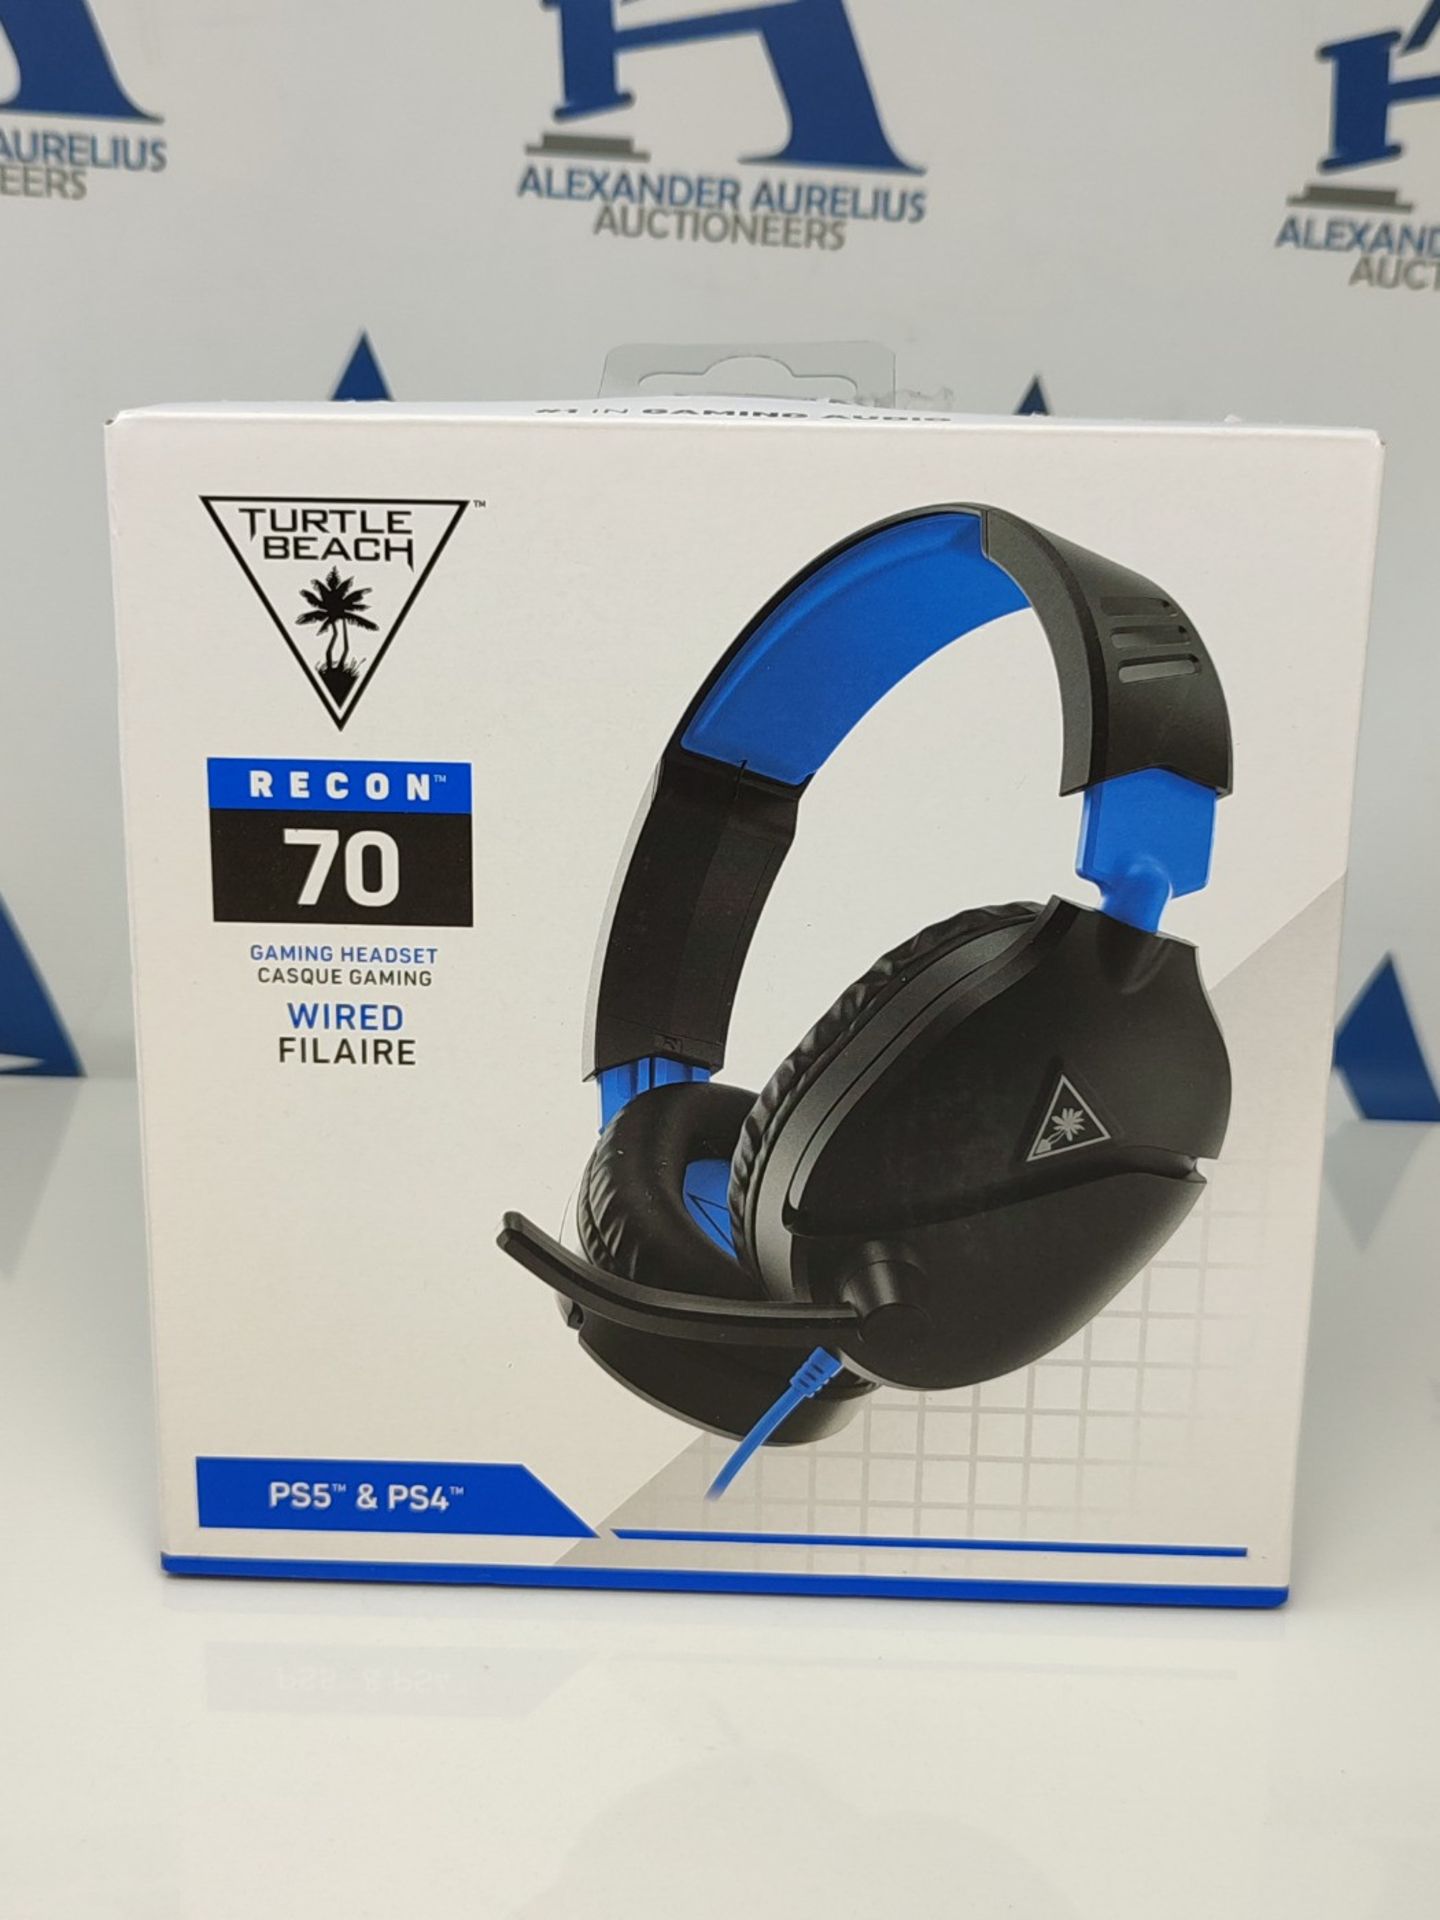 Turtle Beach Recon 70P Gaming Headset - PS4, PS5, Xbox One, Nintendo Switch, and PC - Image 5 of 6